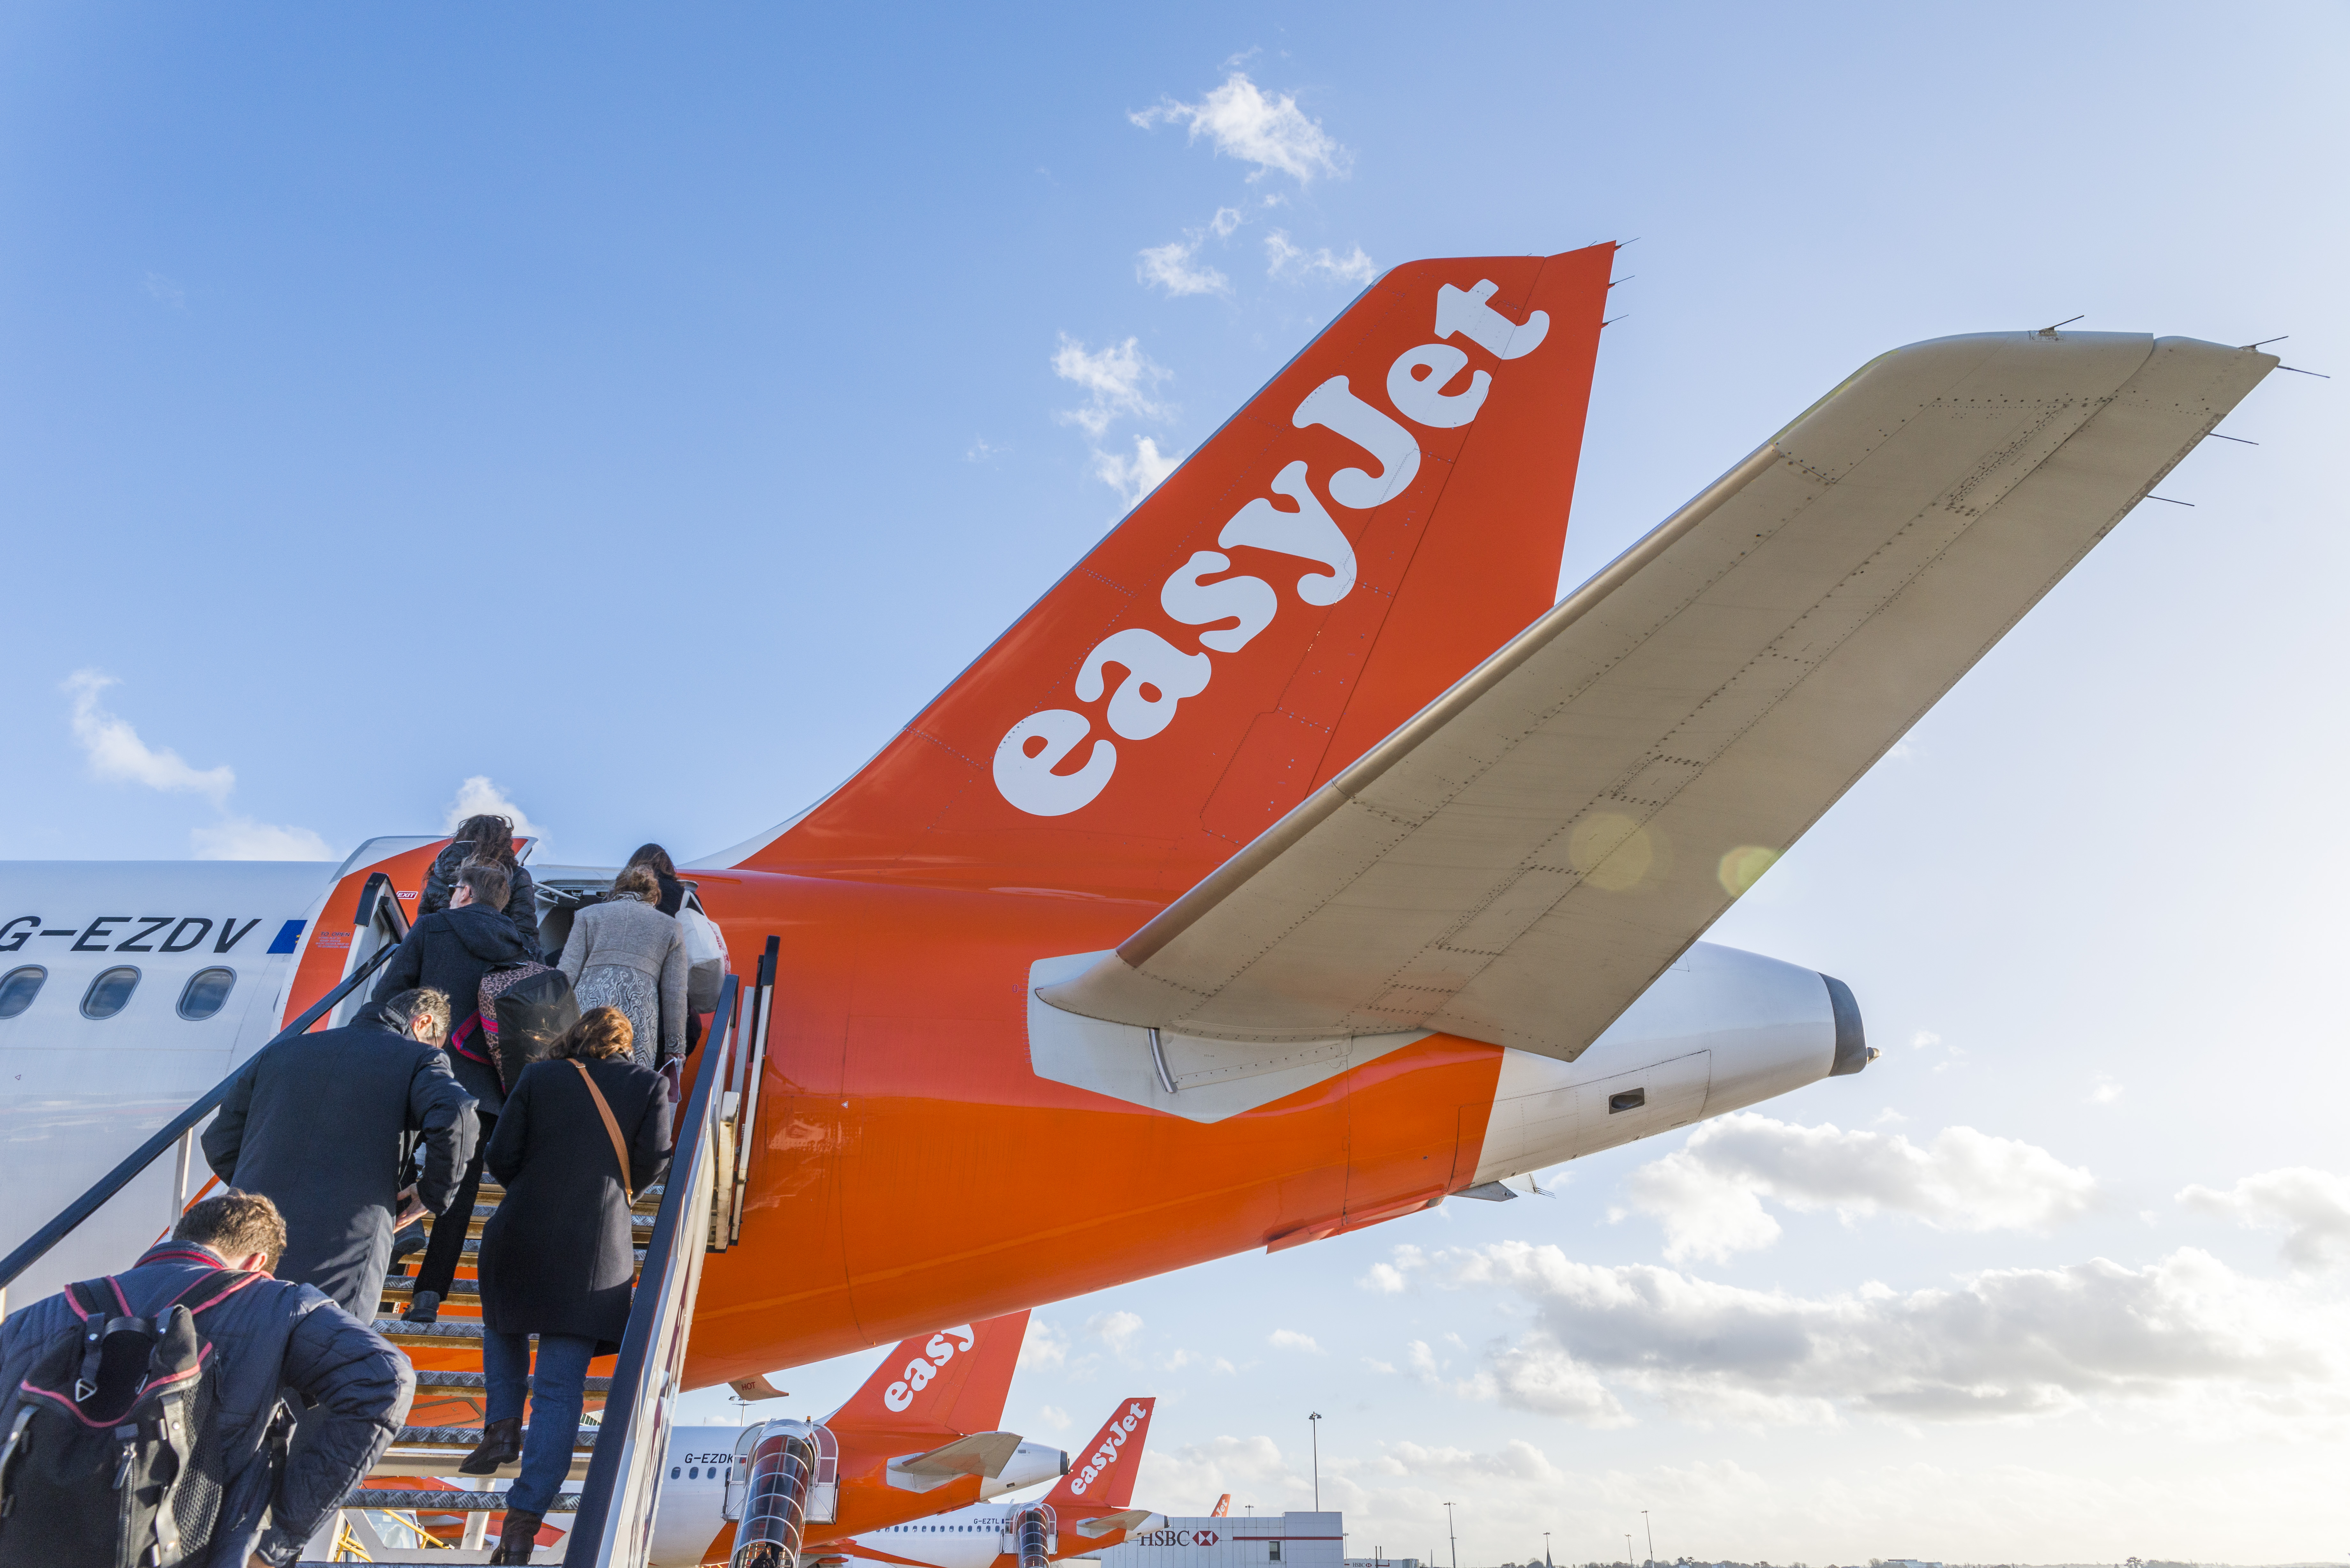 Summer holiday chaos now seems more likely as easyJet pilots rejected a huge pay rise – and they will threaten to strike if the deal is not improved